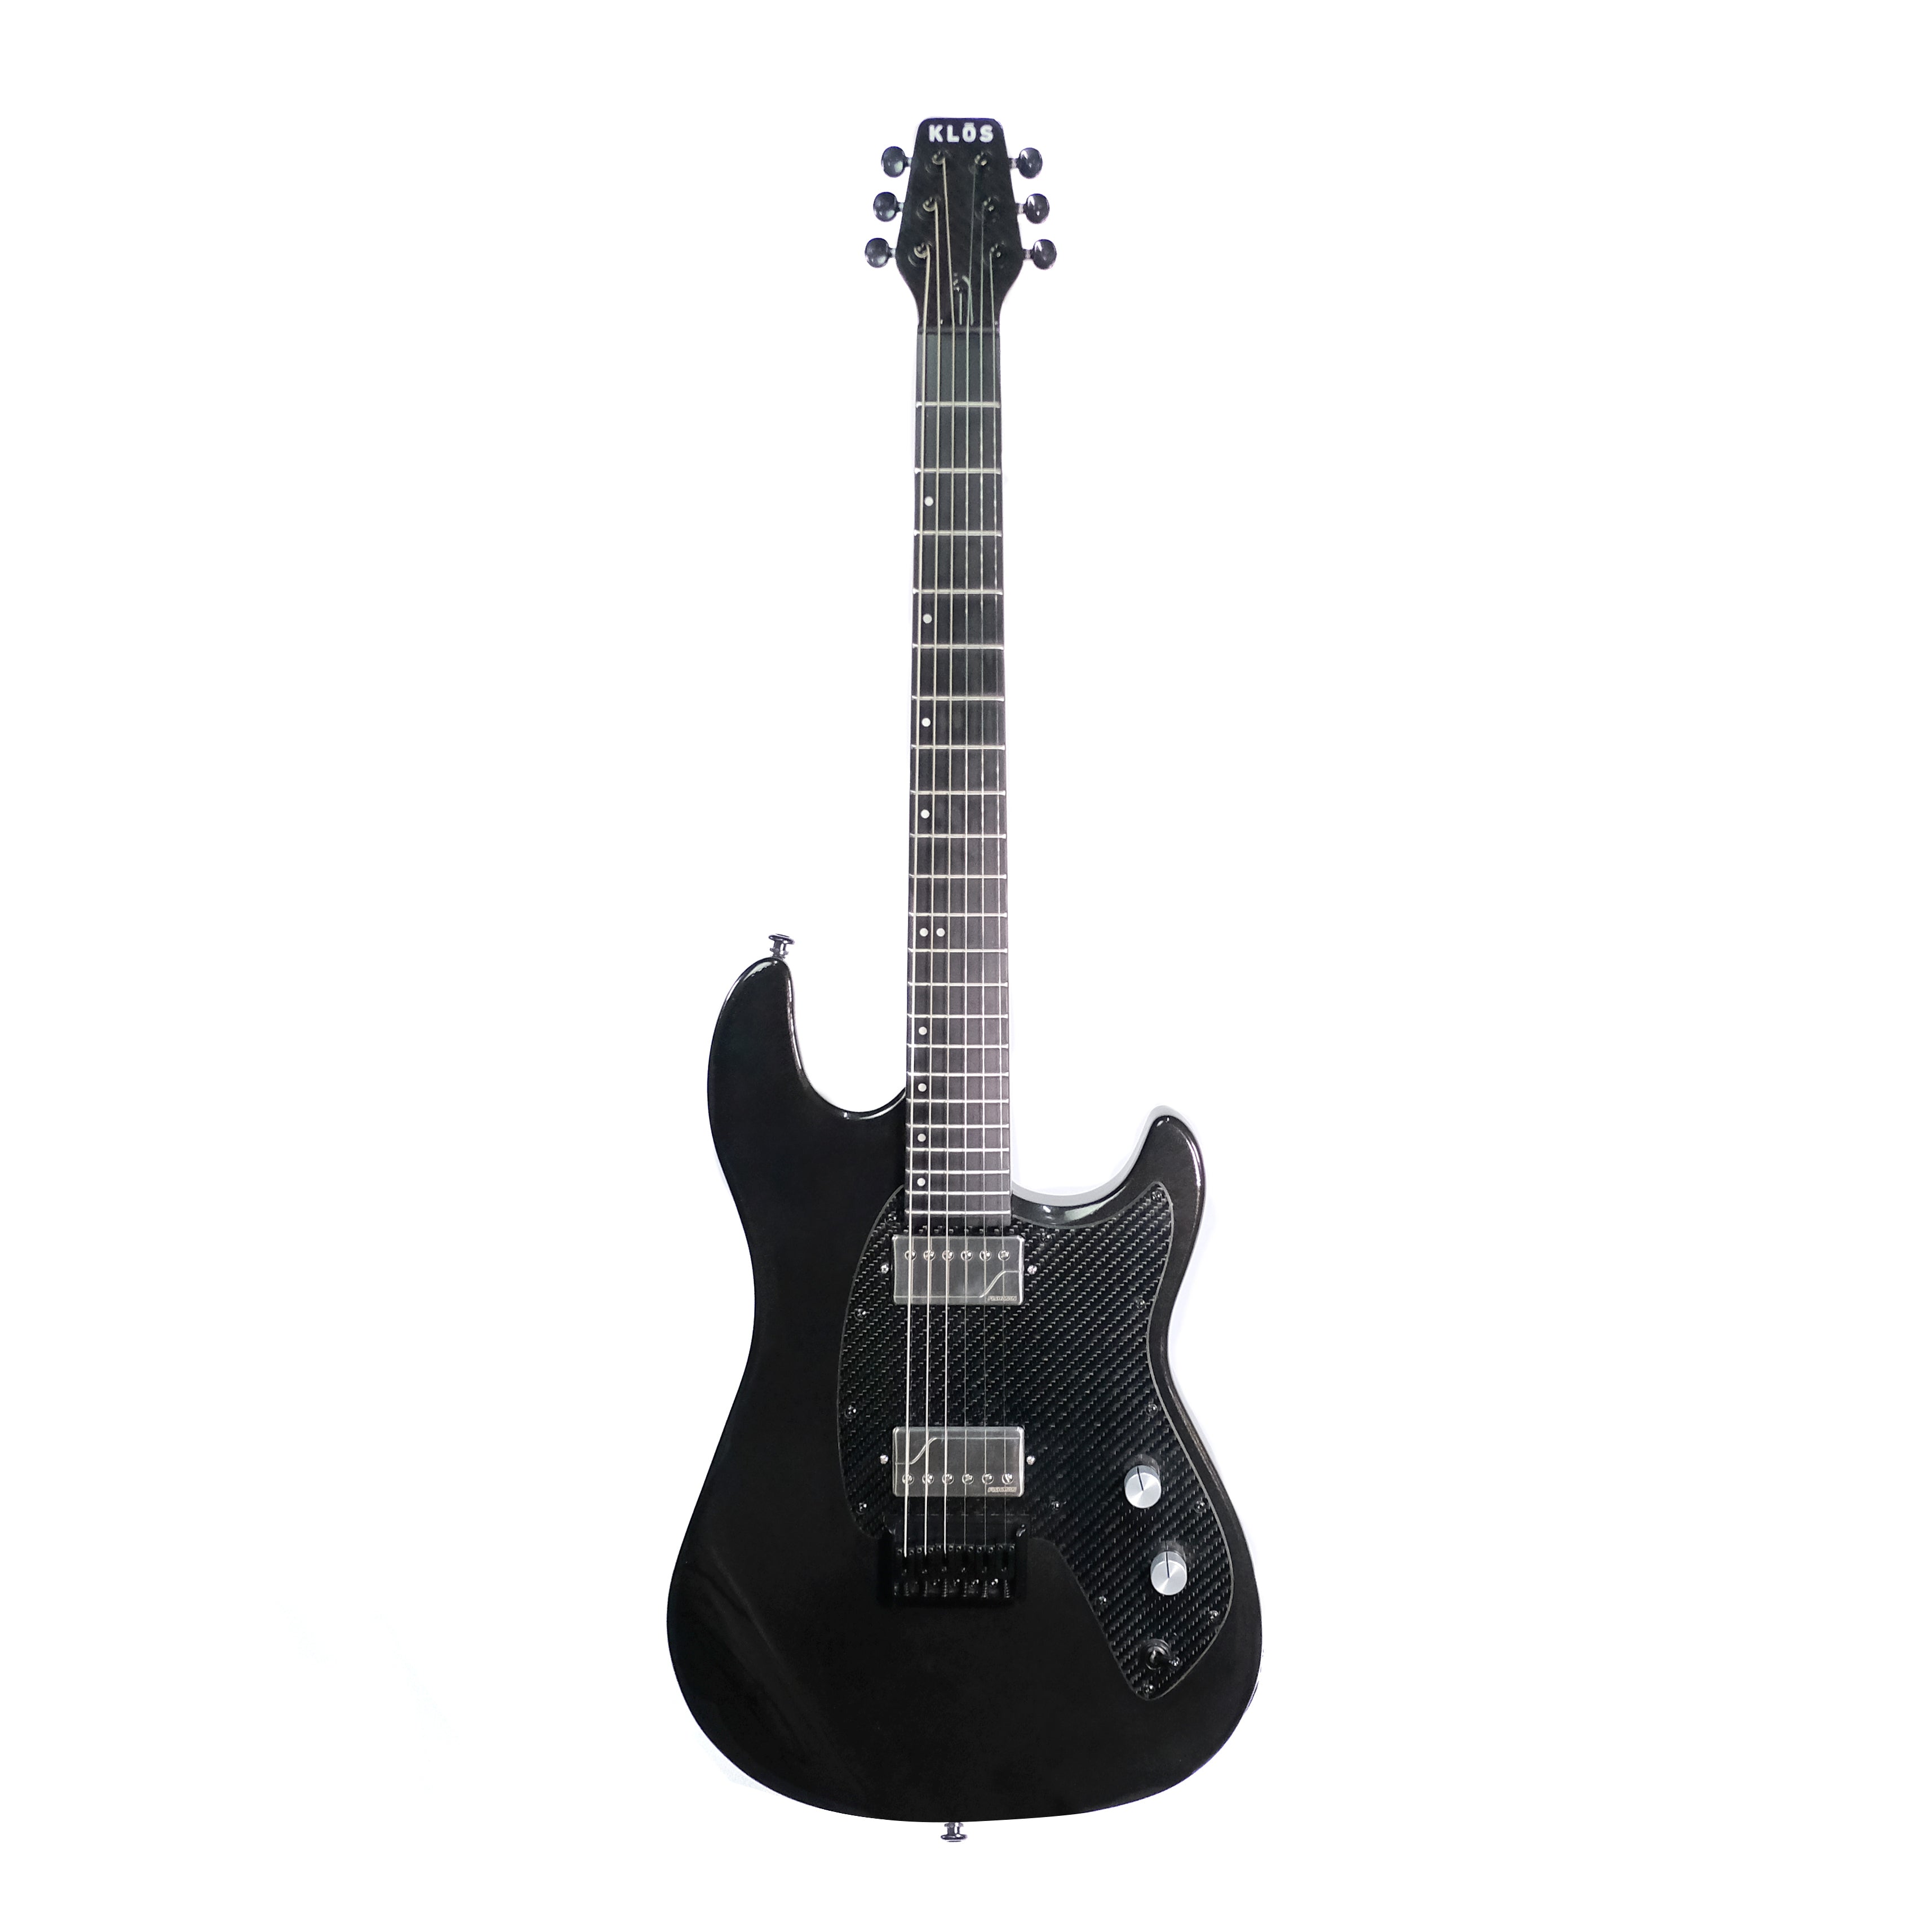 Black Electric Guitar on a white background 